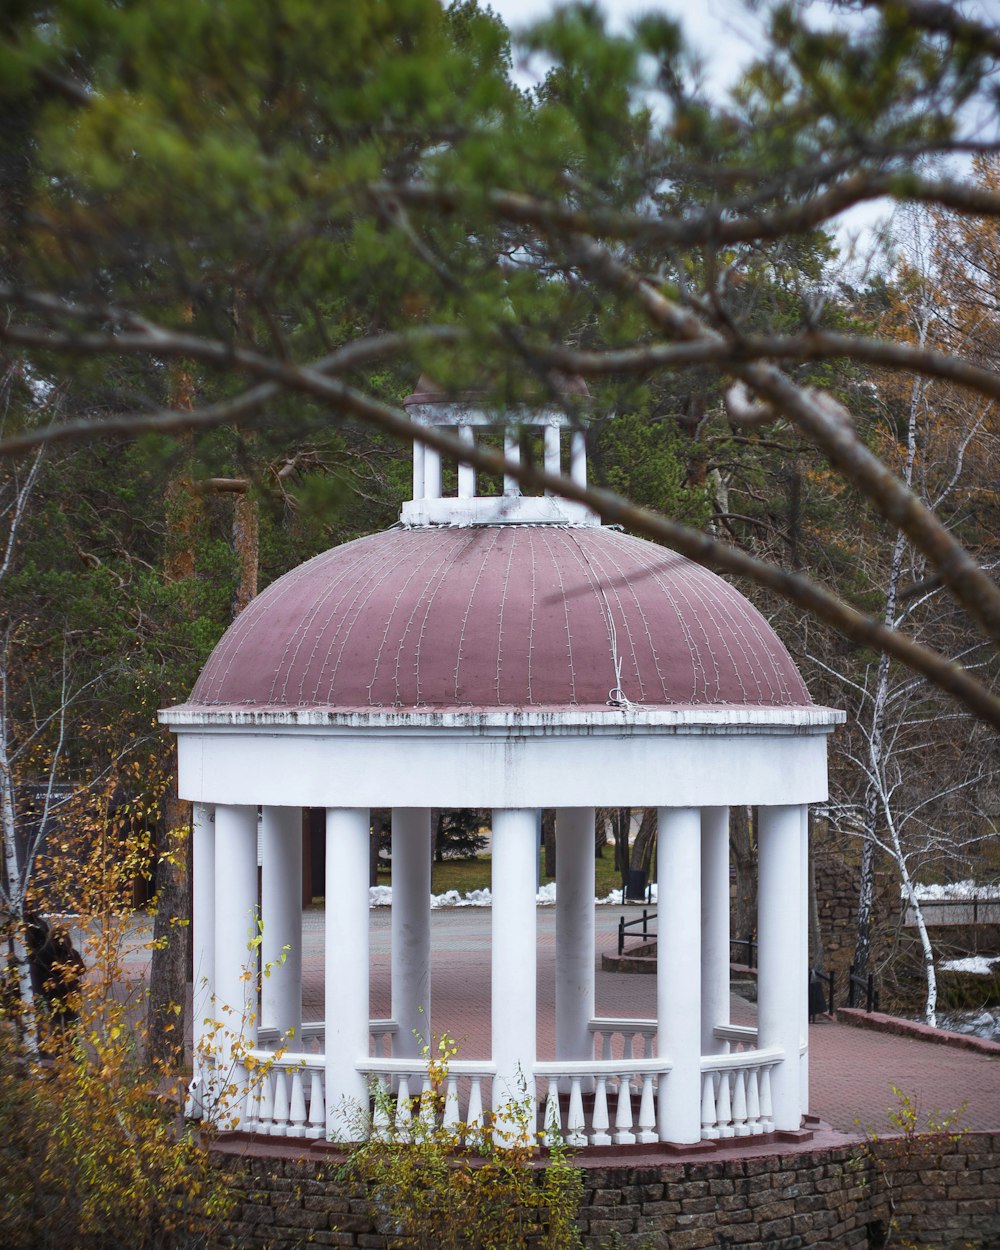 a gazebo in a park surrounded by trees